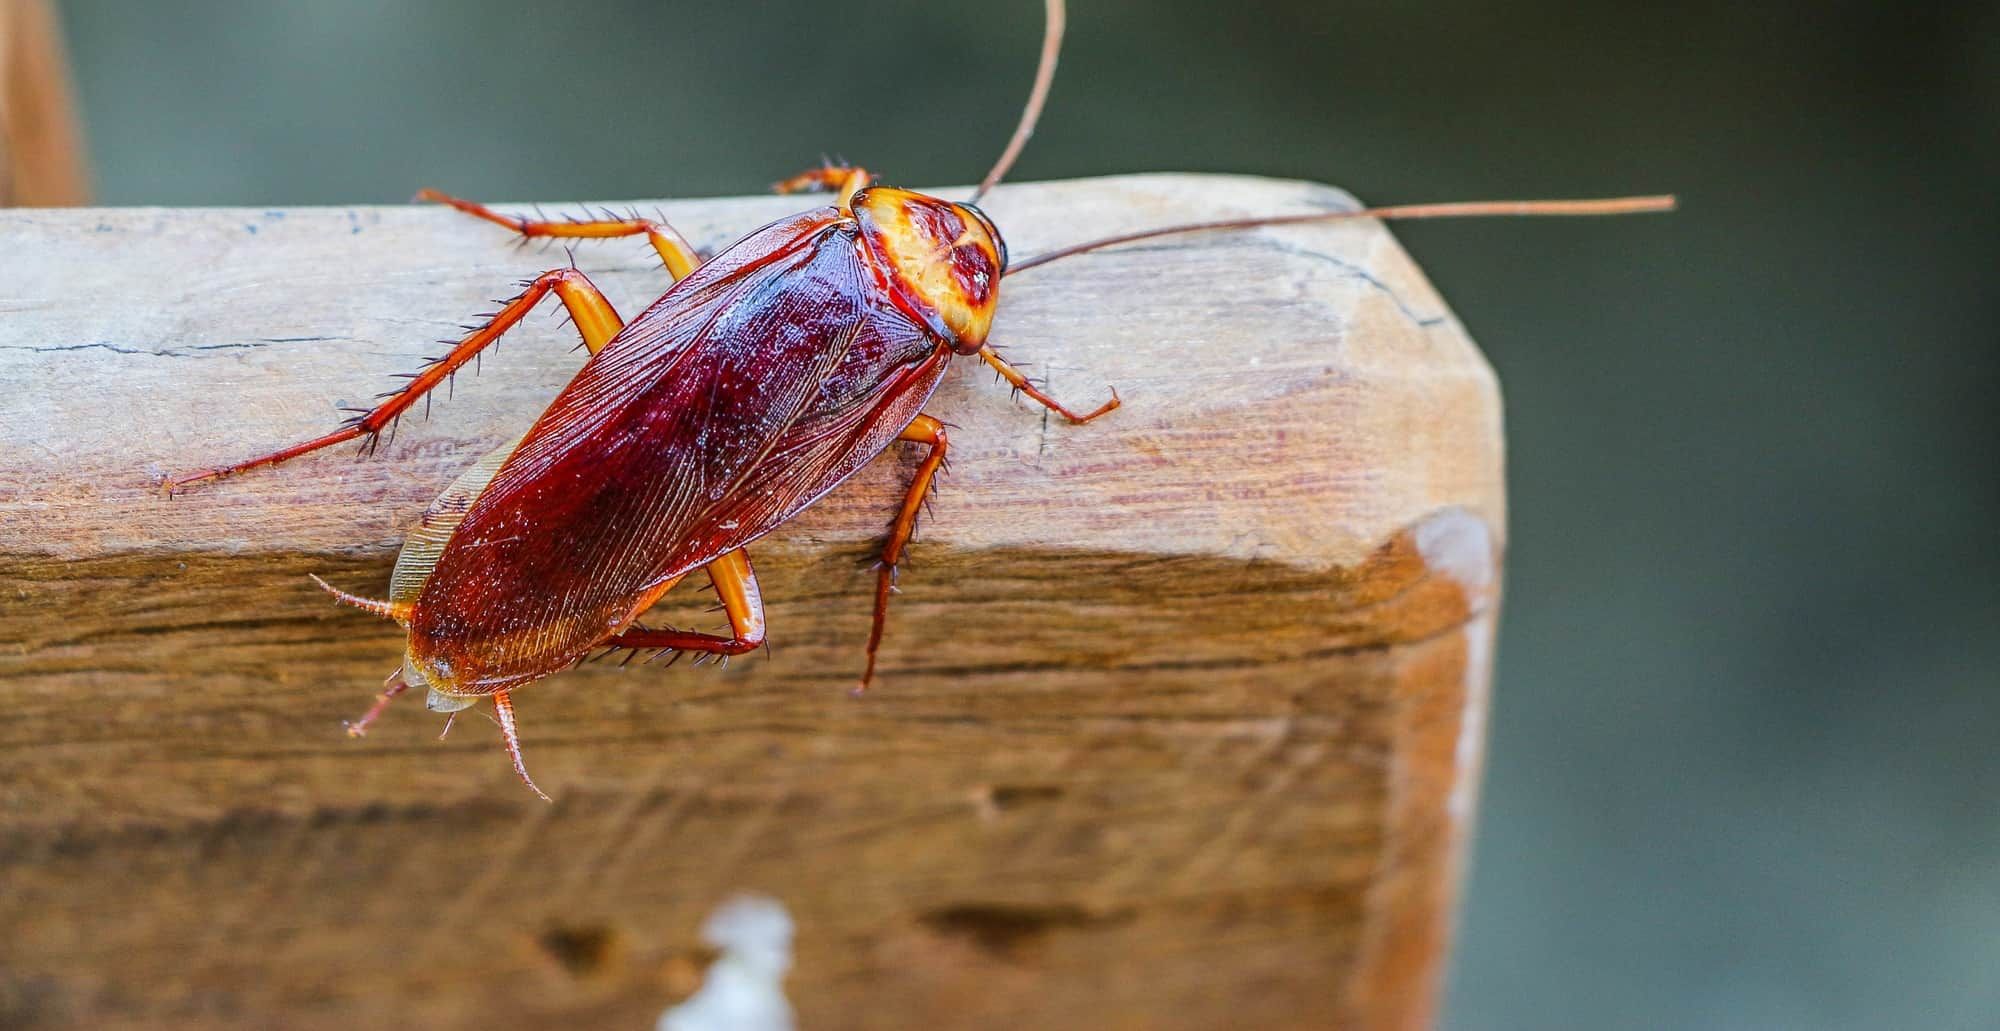 Preventing Roach Infestations: How to Keep Cockroaches Away